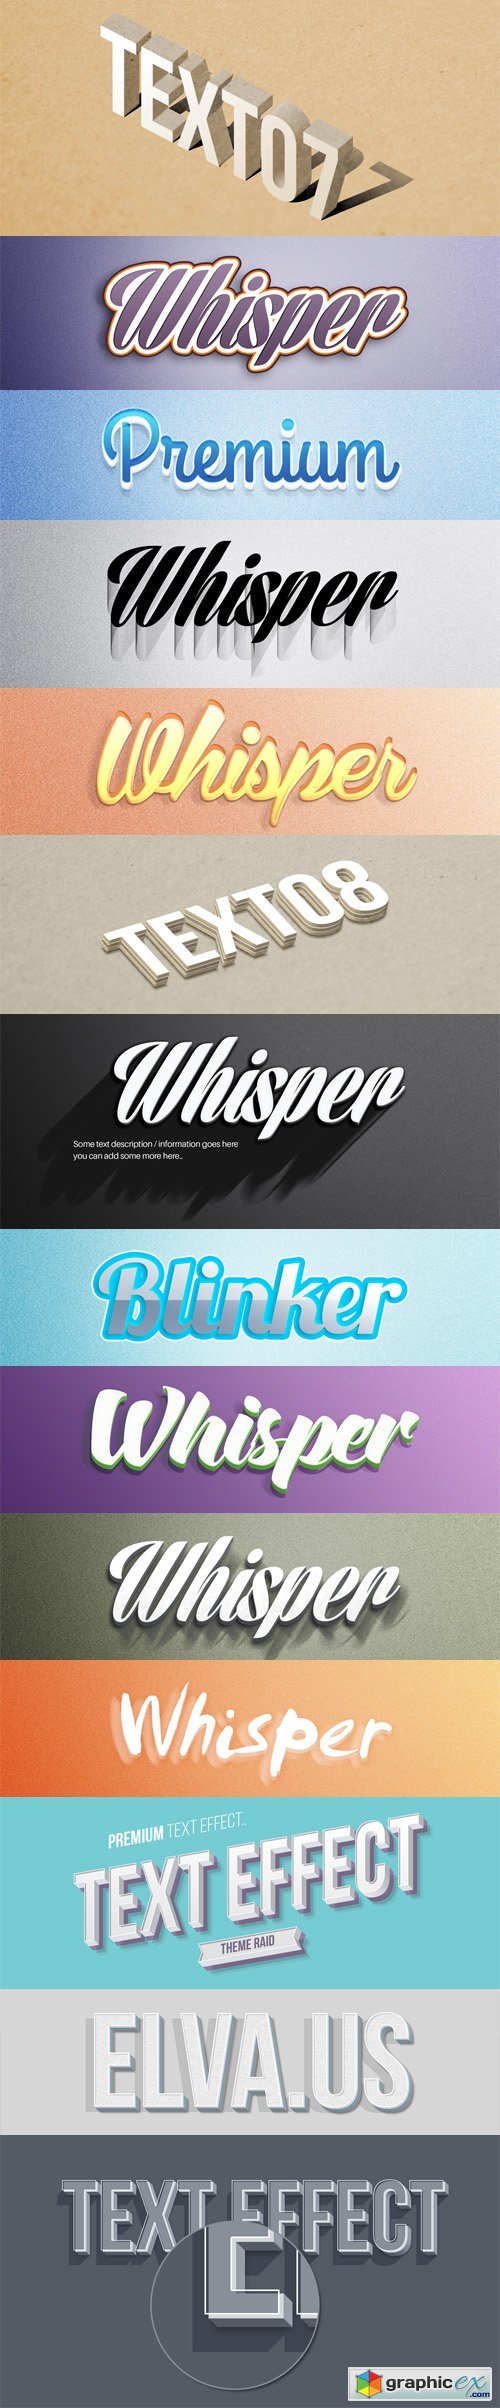 3D Text Effects PSD With Shadows